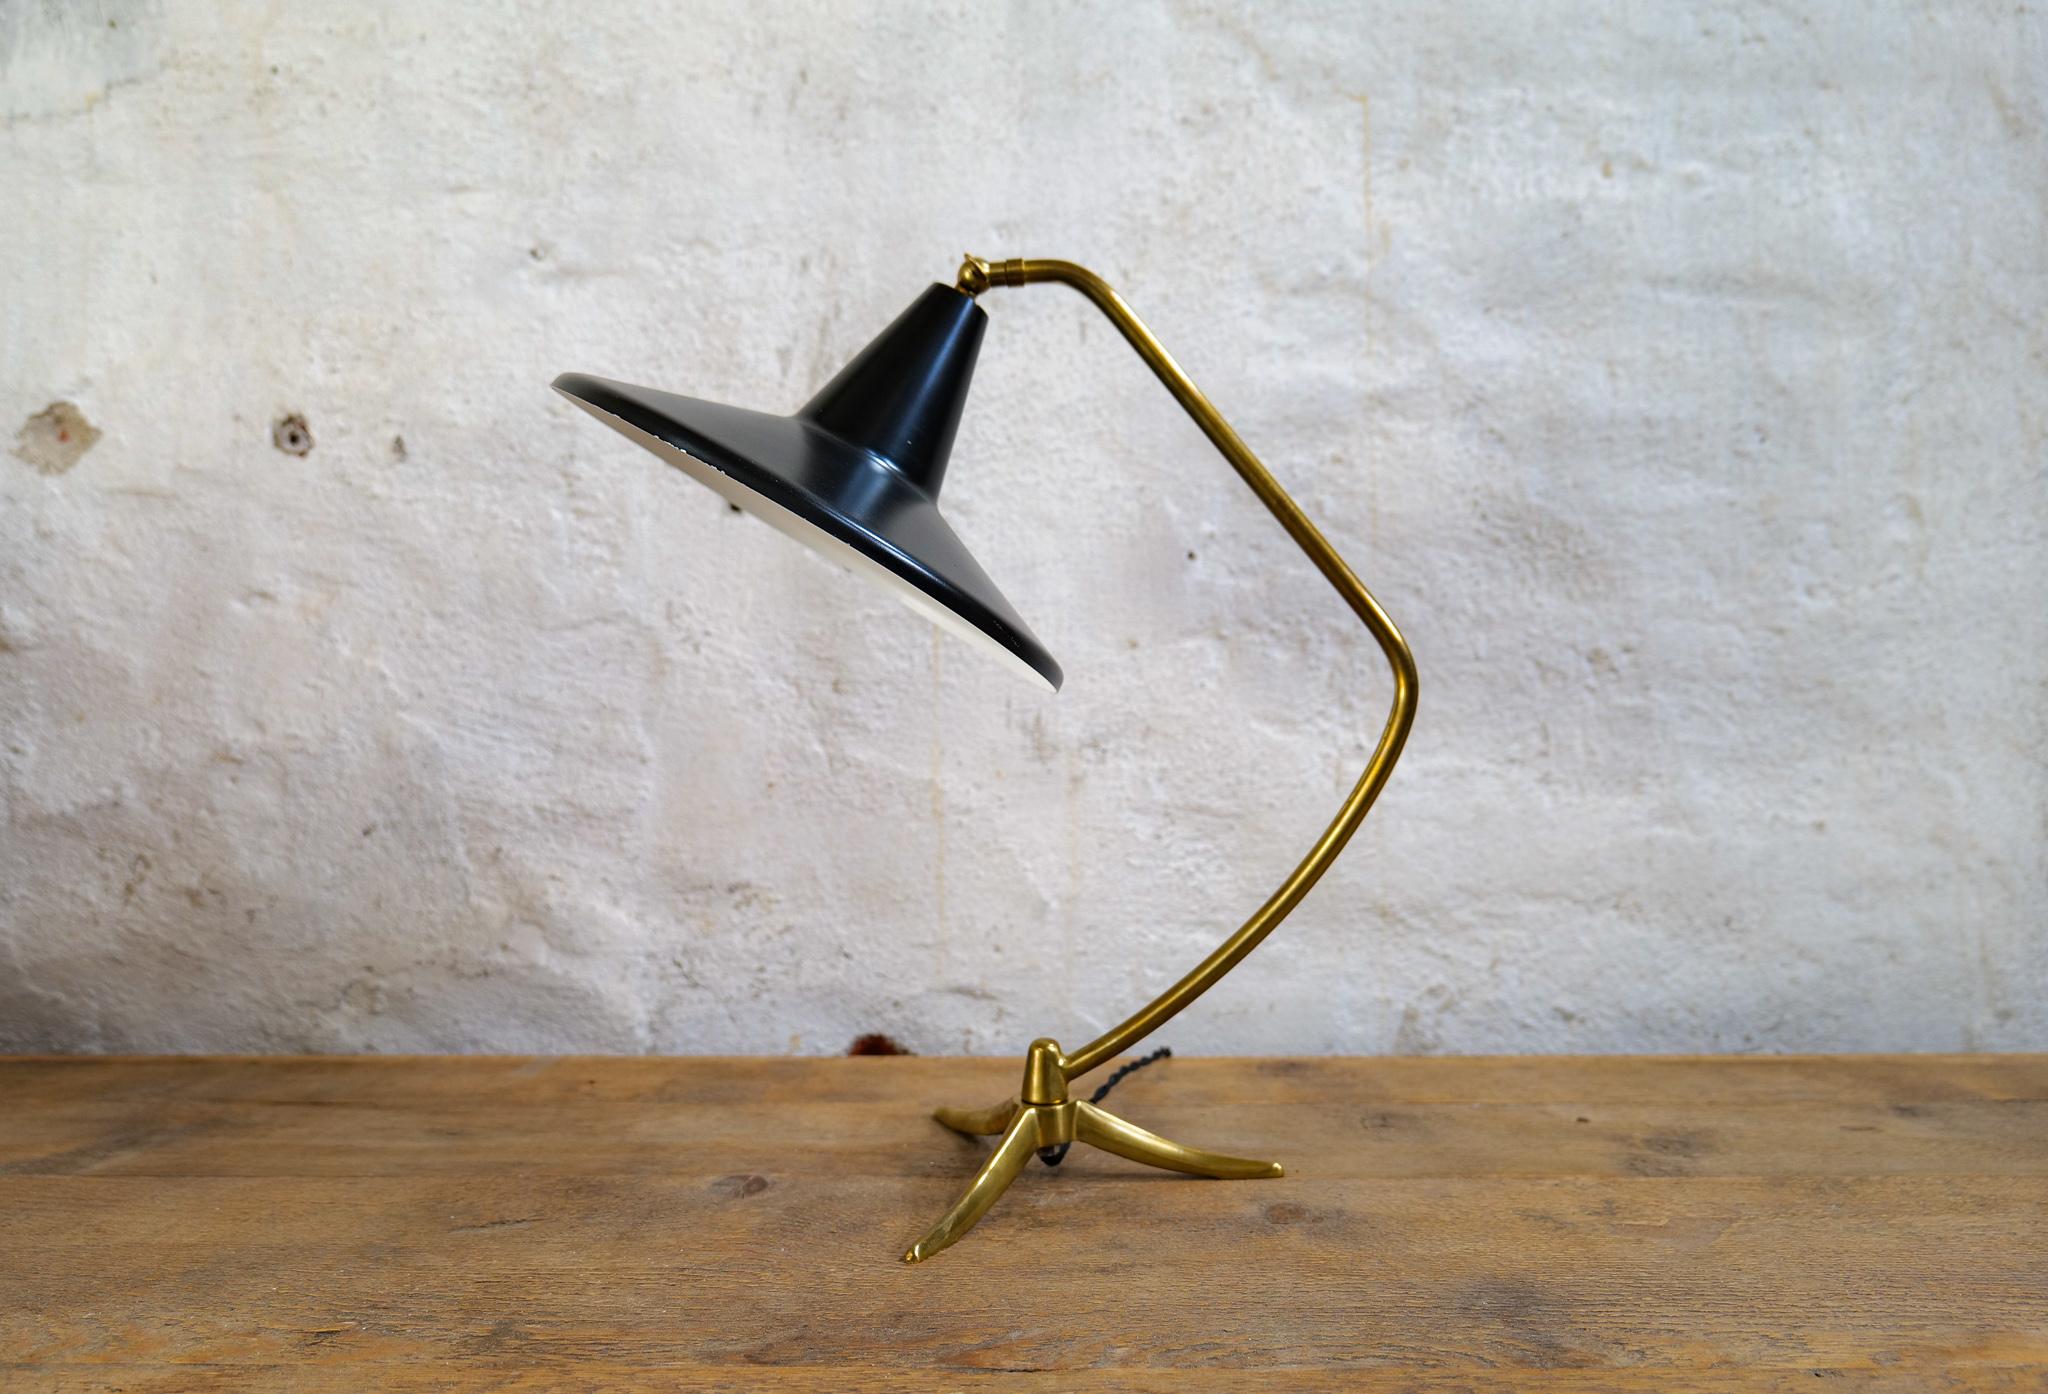 Elegant Swedish table lamp made in 1950 attributed to ASEA. A solid three legged brass base with rod in brass leading up to a black patinated shade in a nice combination. The shade and rod are adjustable.

Good condition with some wear consistent